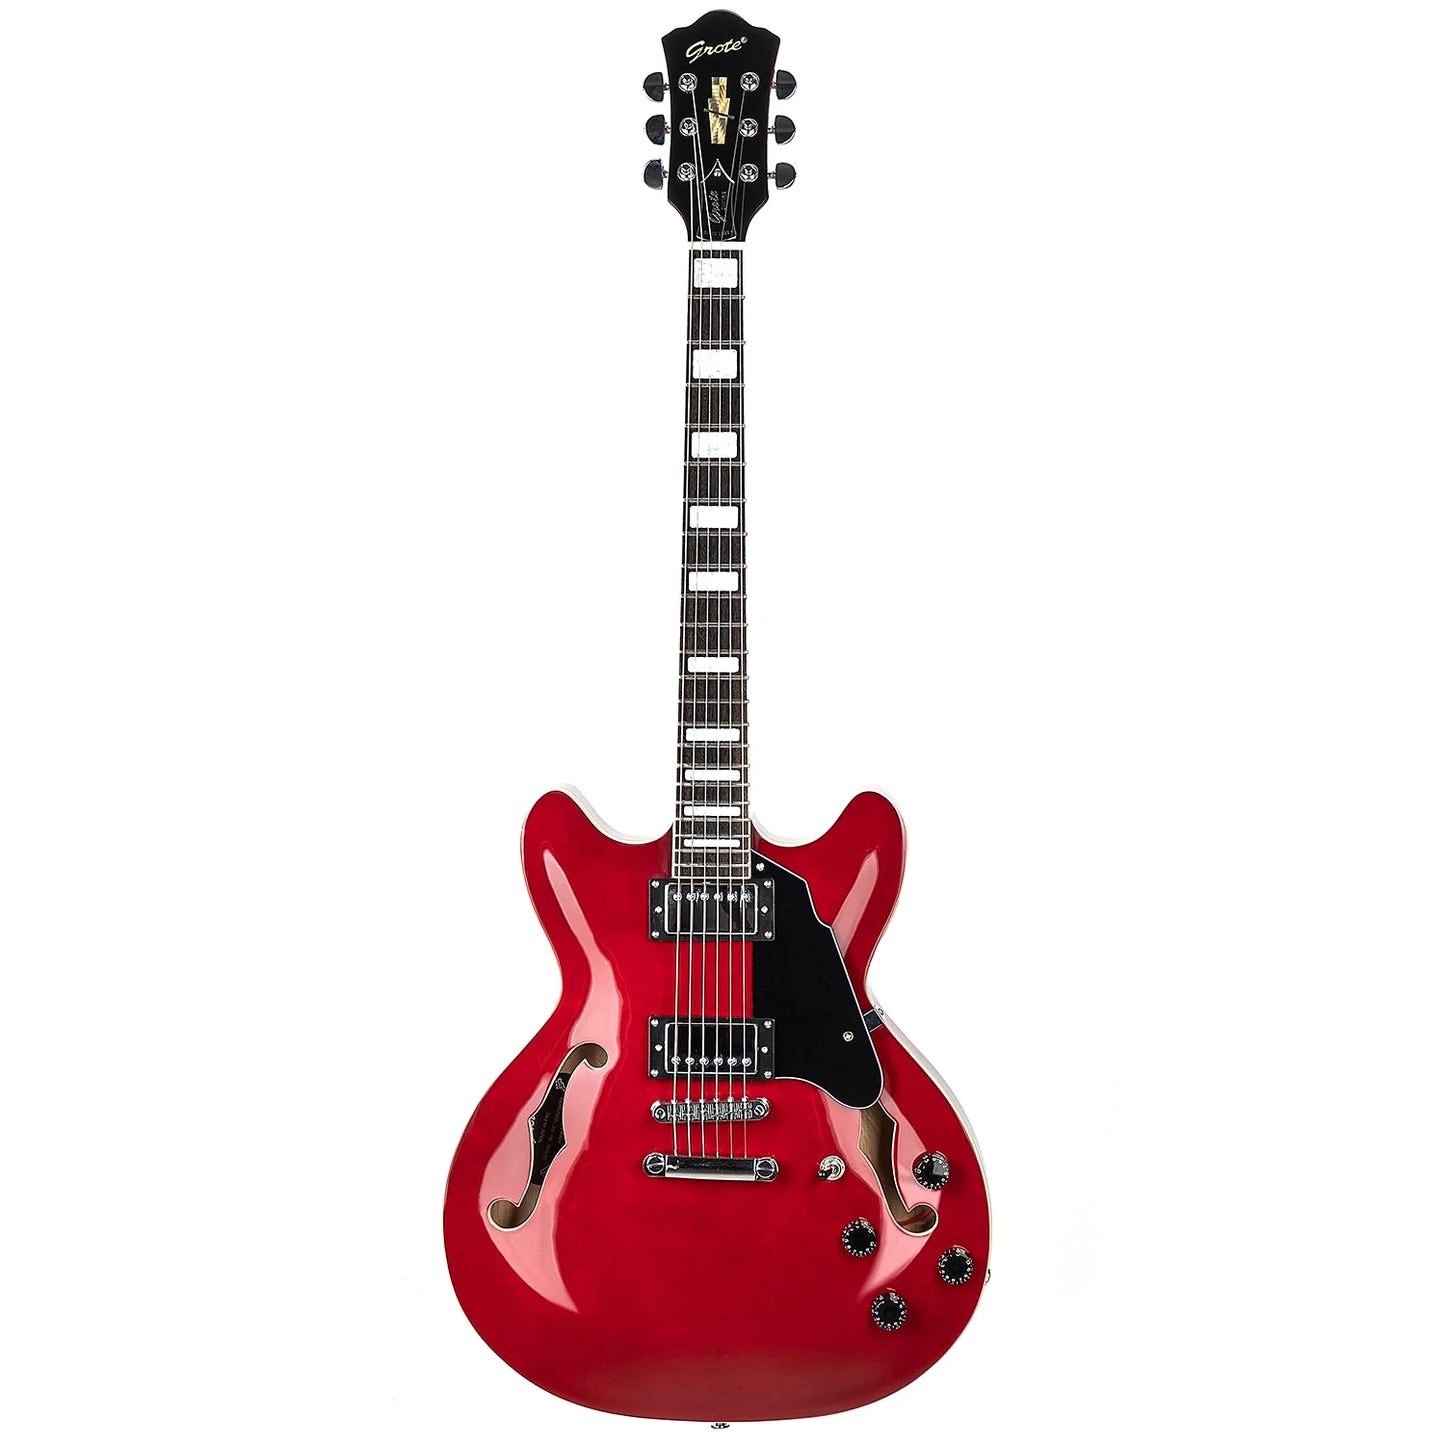 GROTE SEMI-HOLLOW BODY ELECTRIC GUITAR CHERRY RED GRWB-TR35